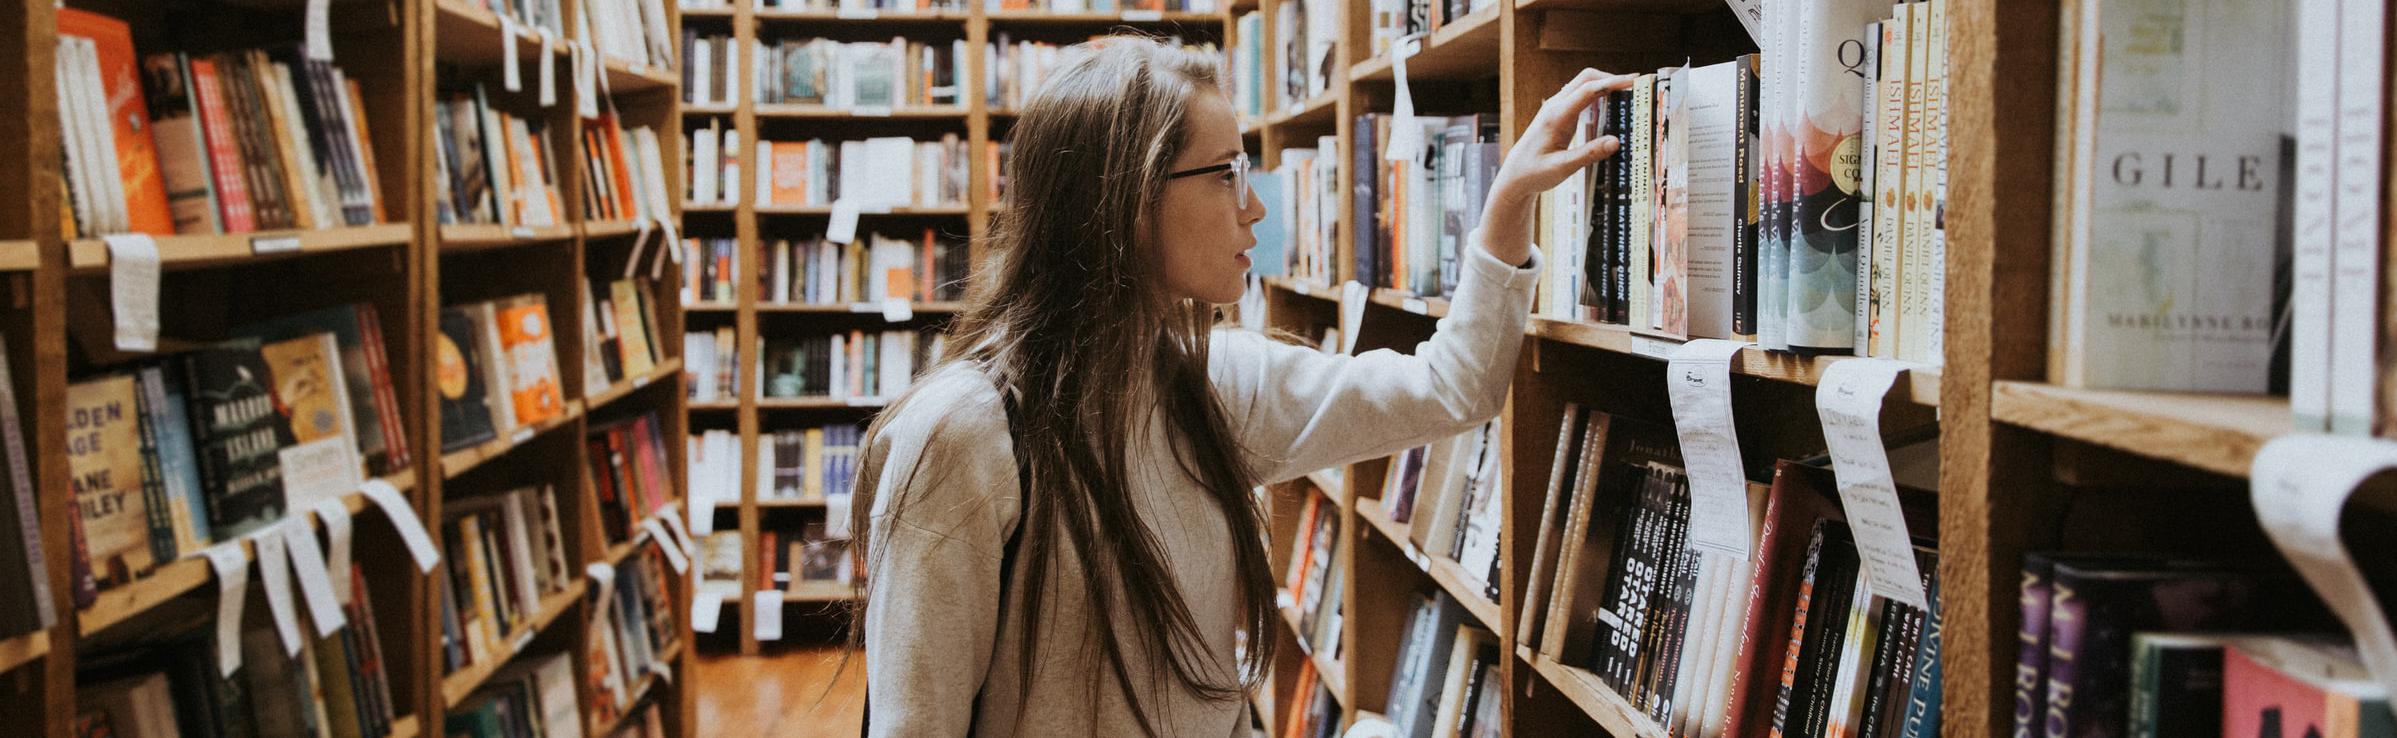 female college student looking at books